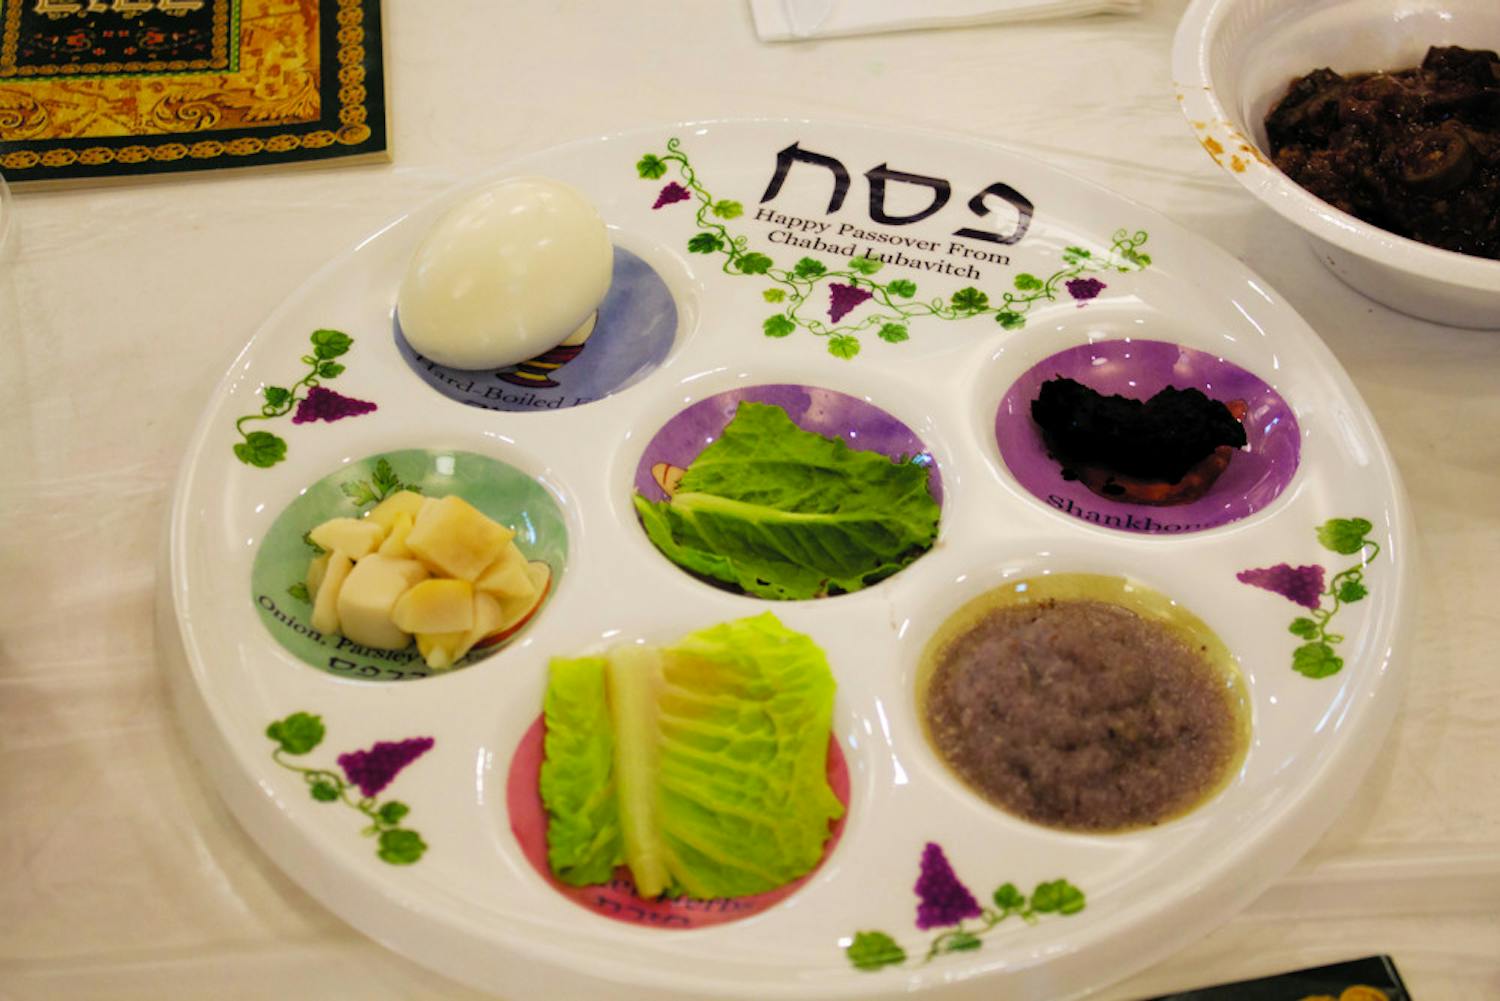 [FILE PHOTO] A seder sits on a table just before Passover begins. Each ingredient on the plate represents a different part of the story of how the Israelites were liberated from slavery in Egypt thousands of years ago, said Gabriel Ruiz, a UF Health Shands Hospital information technology analyst. 